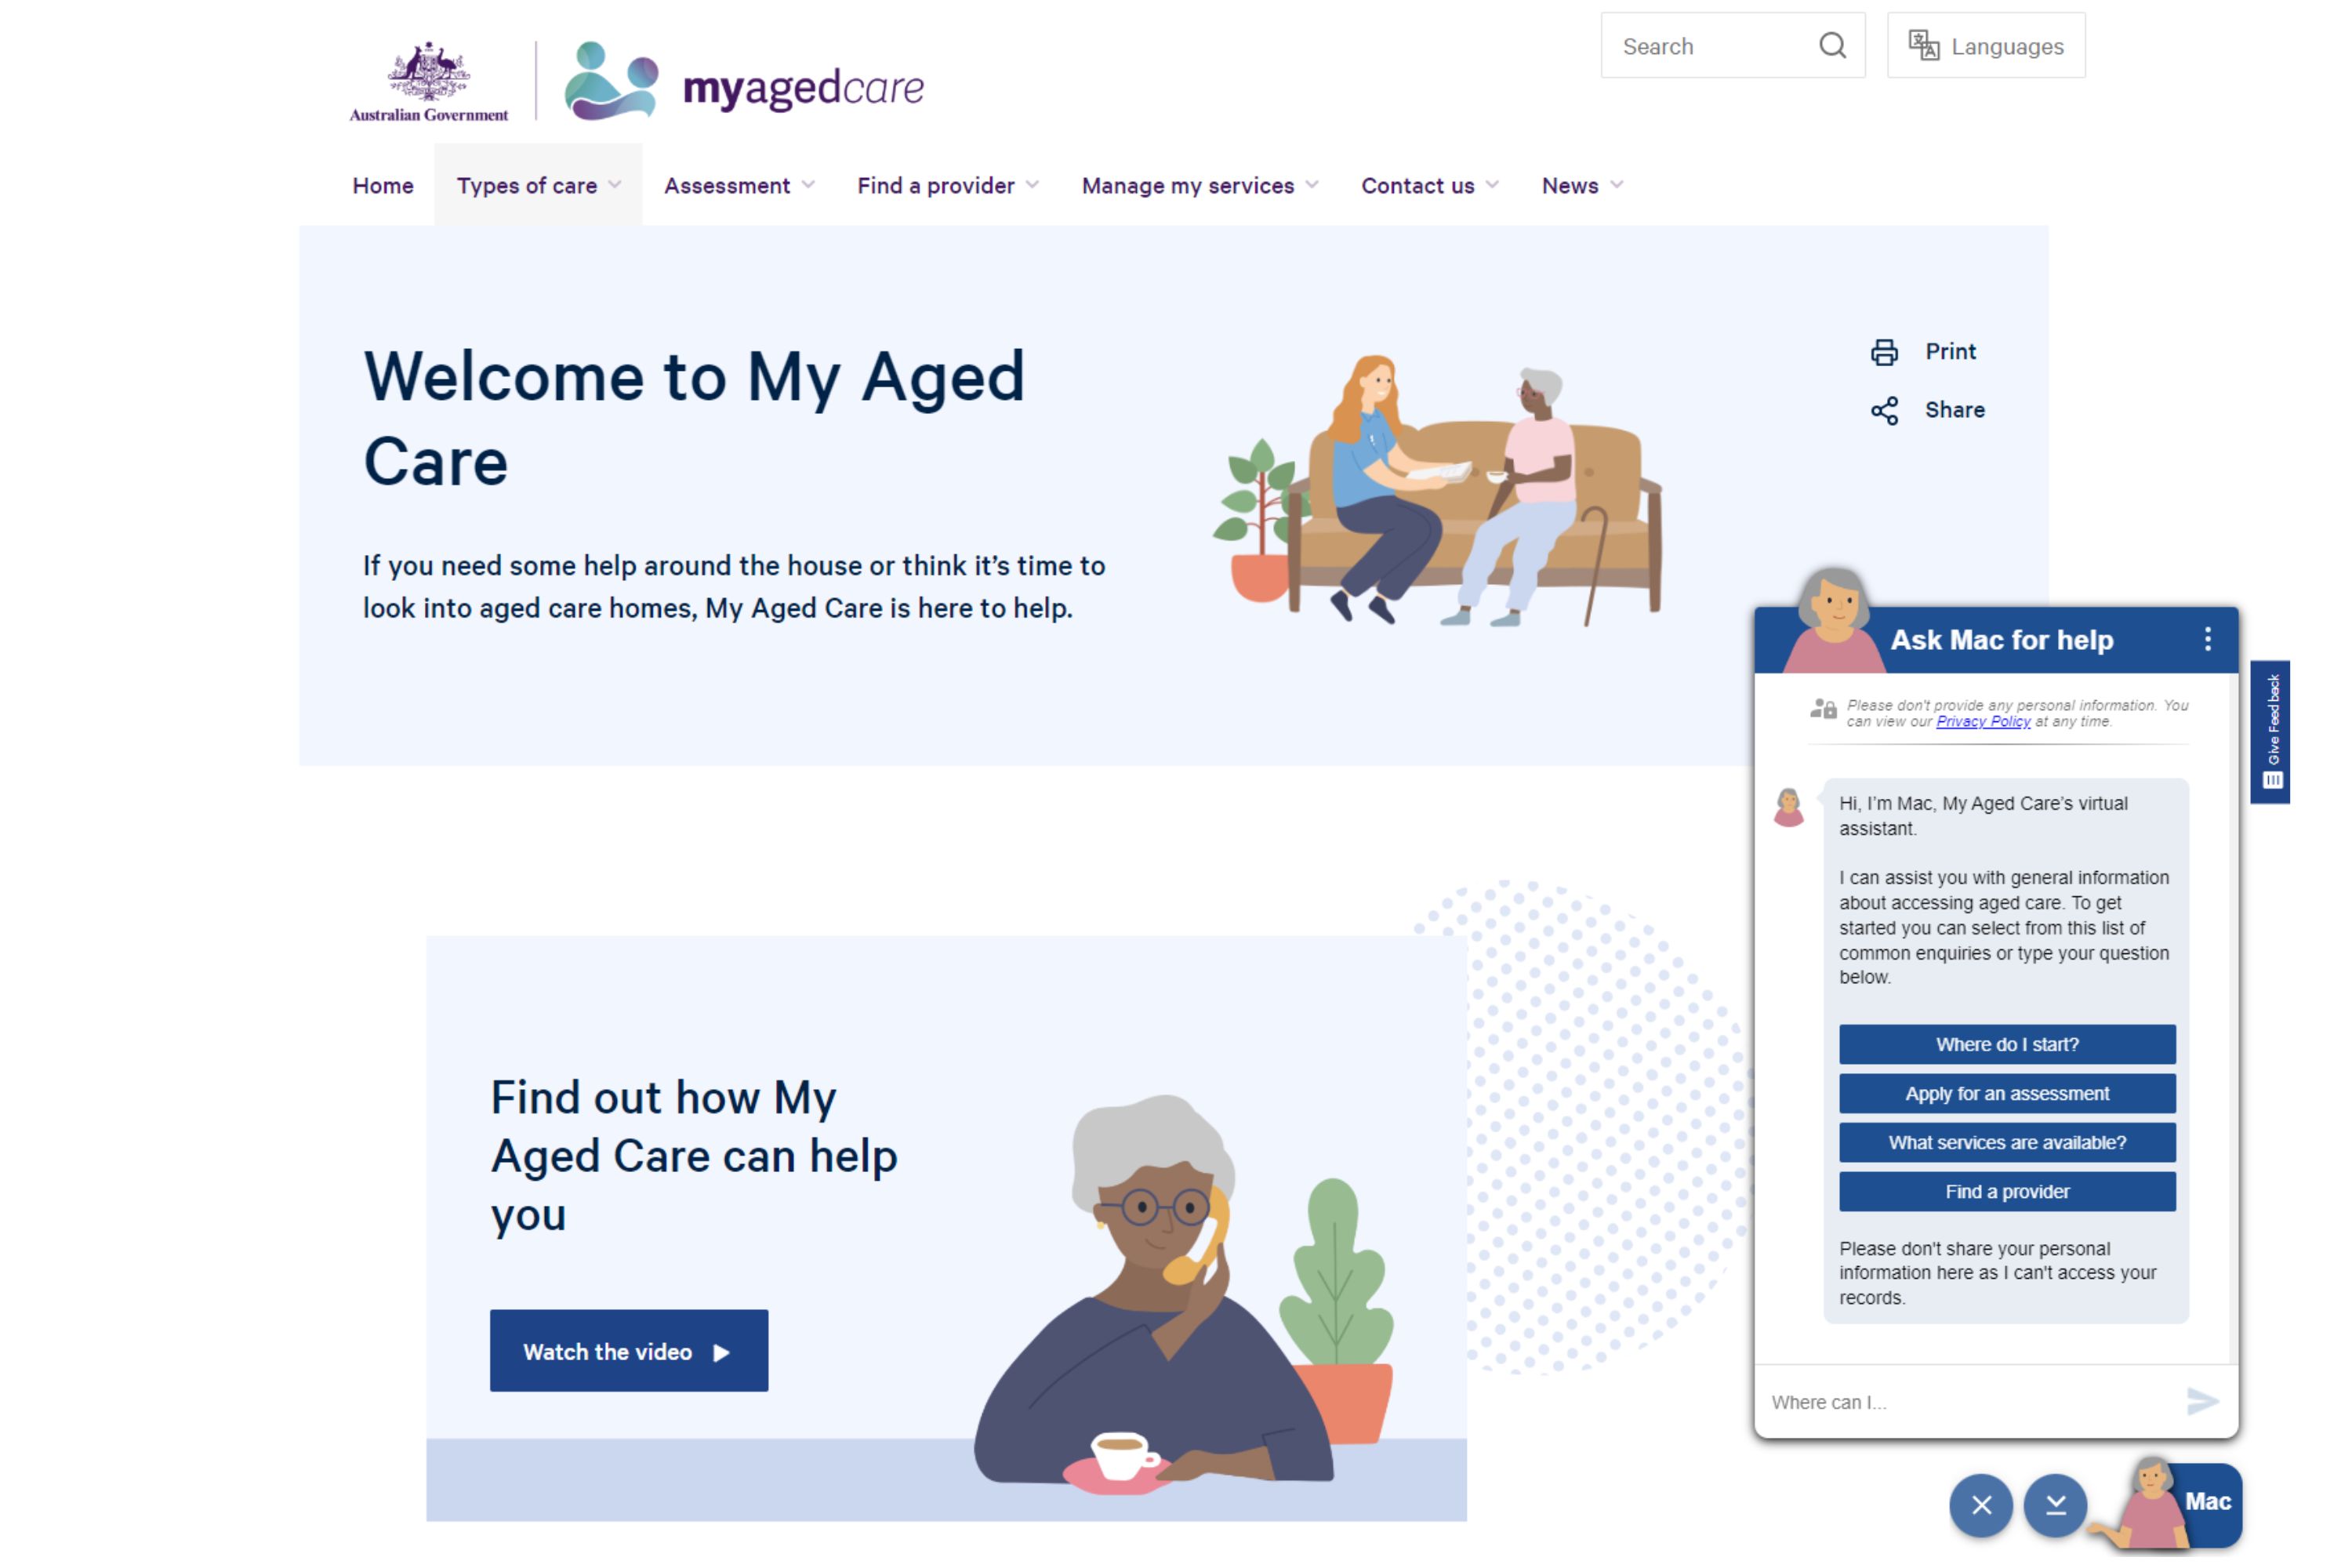 A screenshot of the My Aged Care website